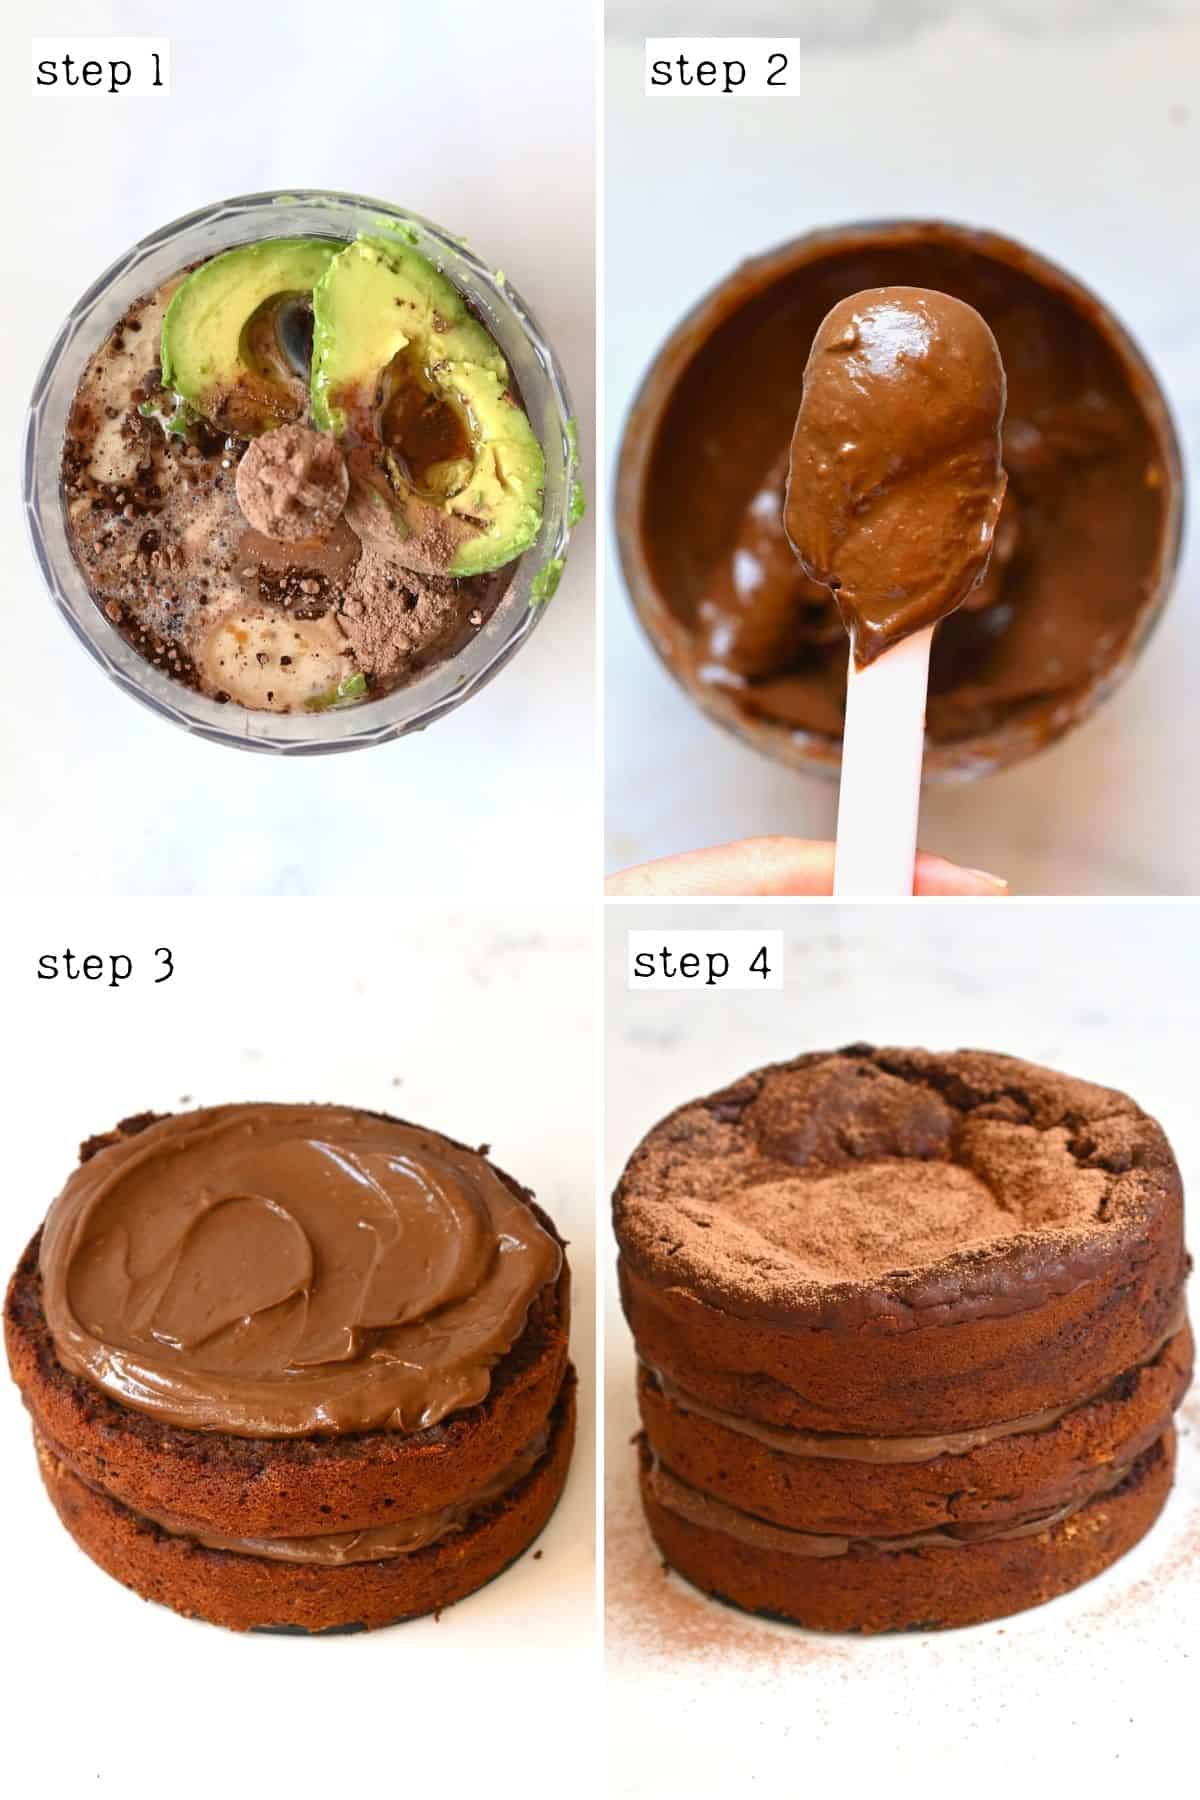 Steps for adding frosting to cake